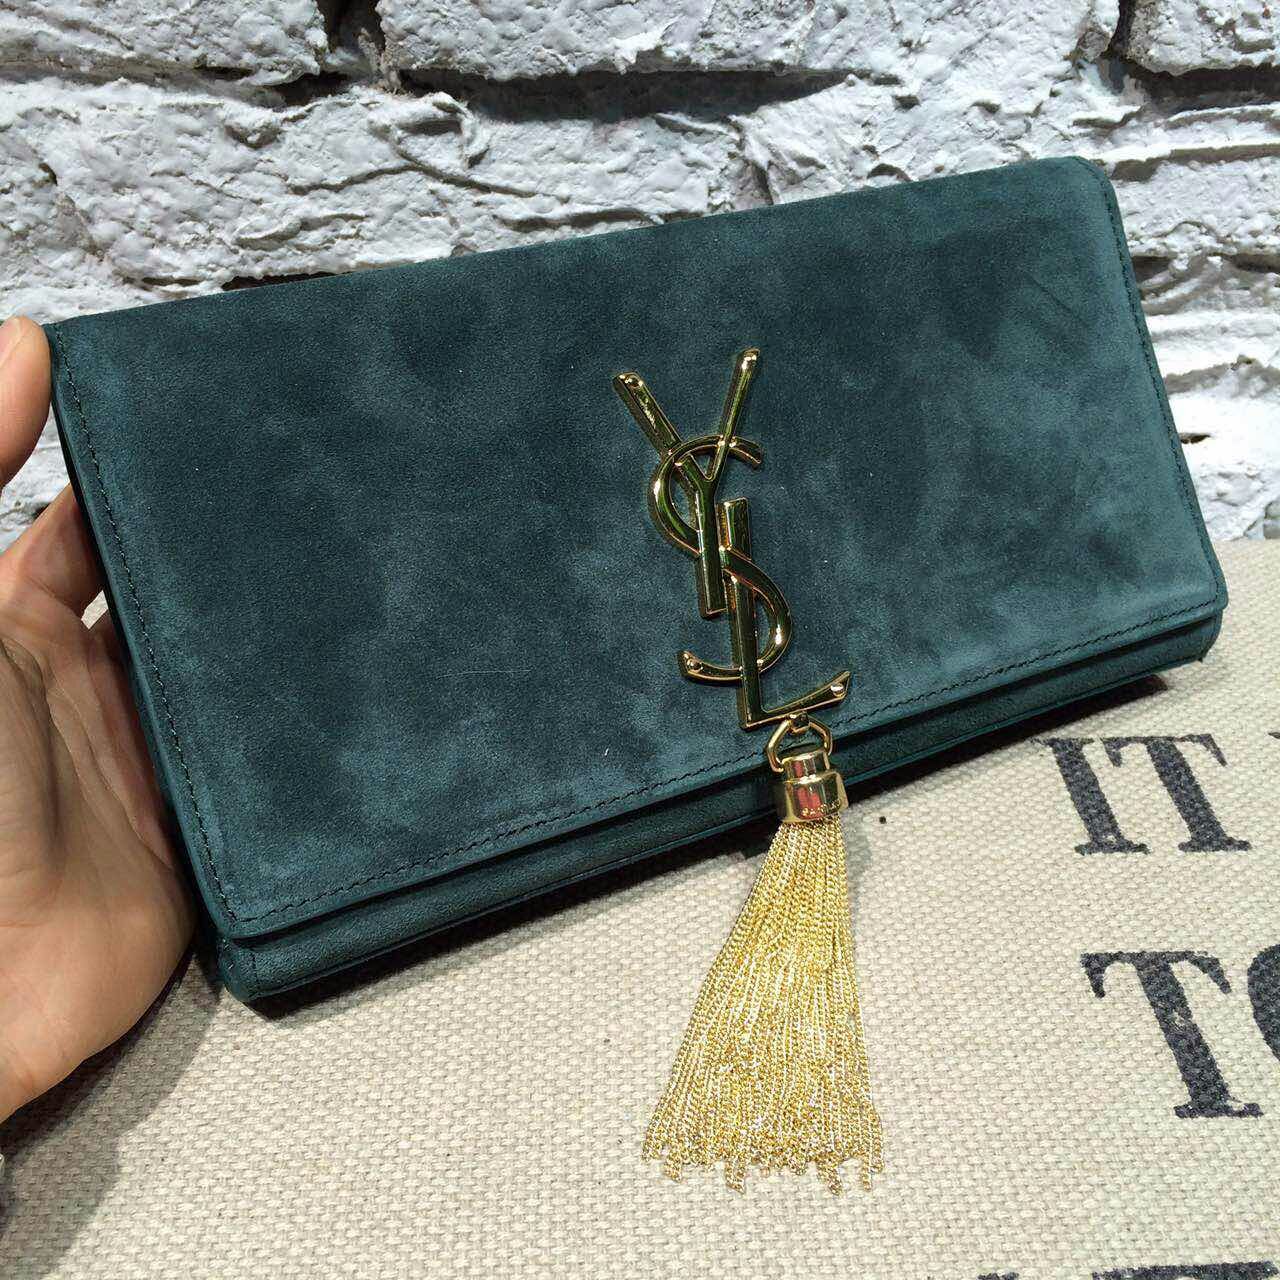 -2014 latest YSL Classic Monogramme Tassel Clutch suede leather green